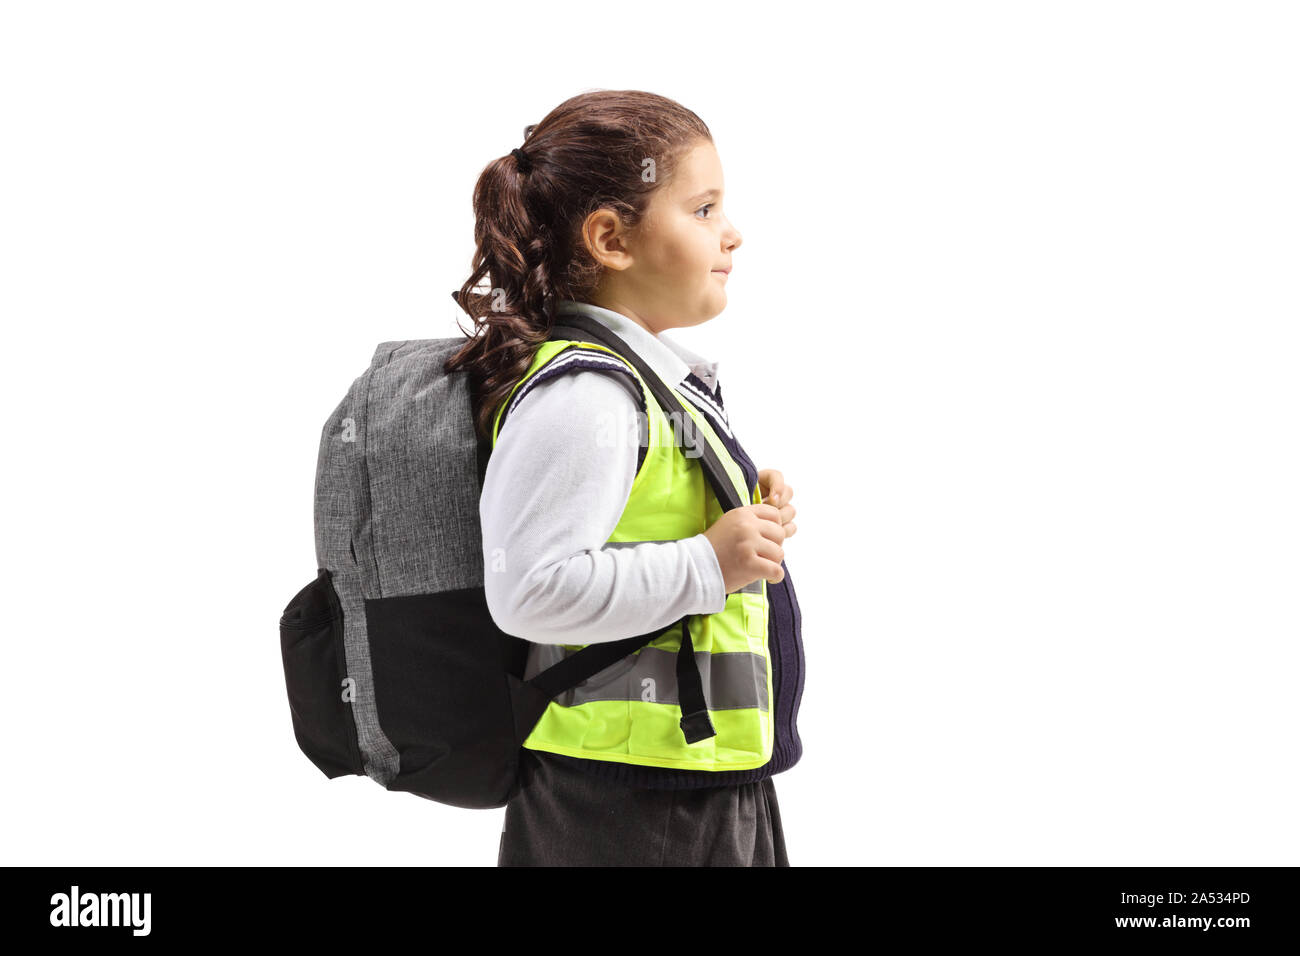 Schoolgirl with a safety vest standing isolated on white background Stock Photo